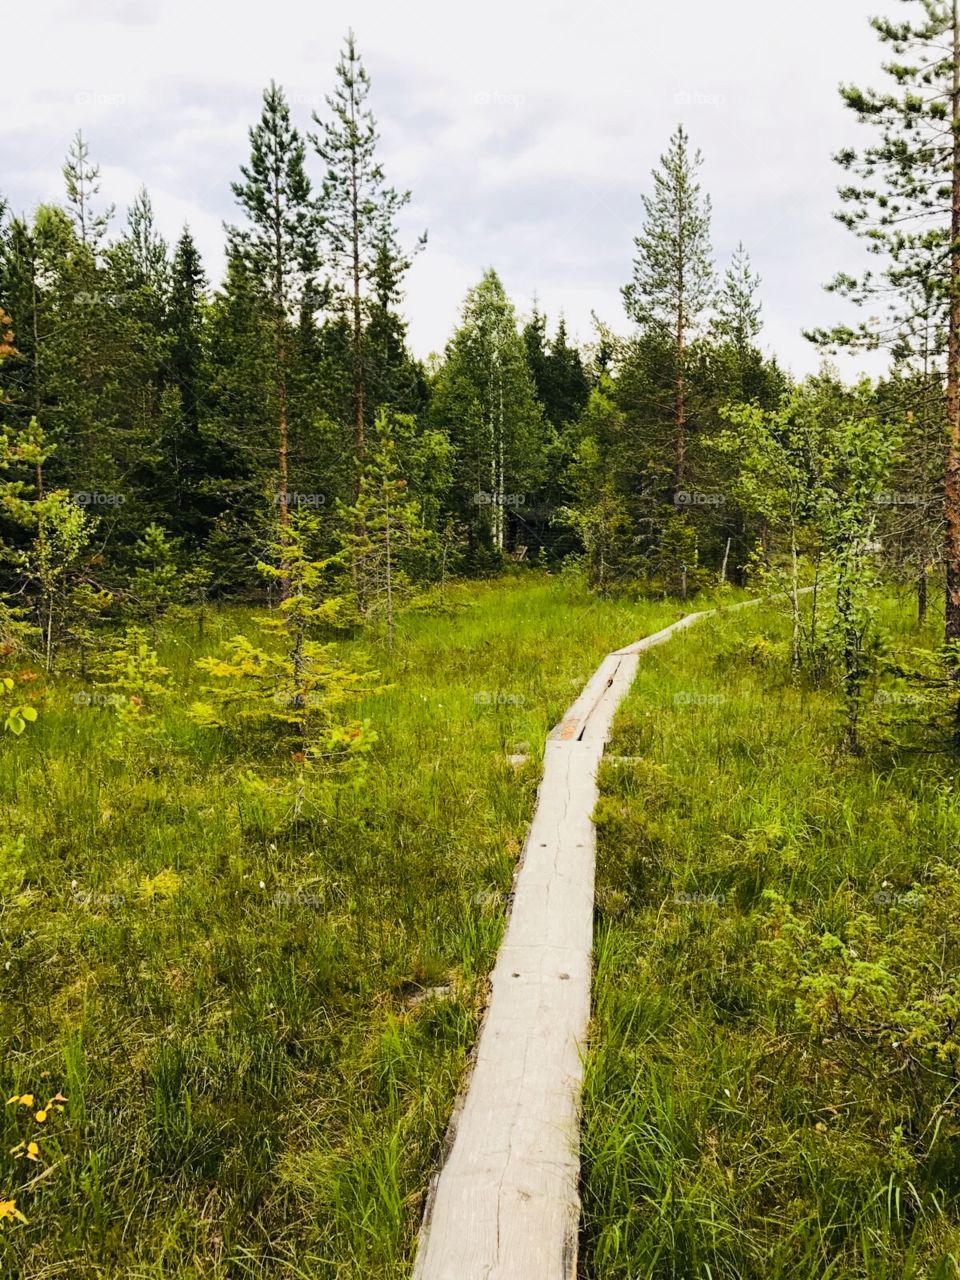 The Koli national park in Finland: Green Forrest and wooden pathway